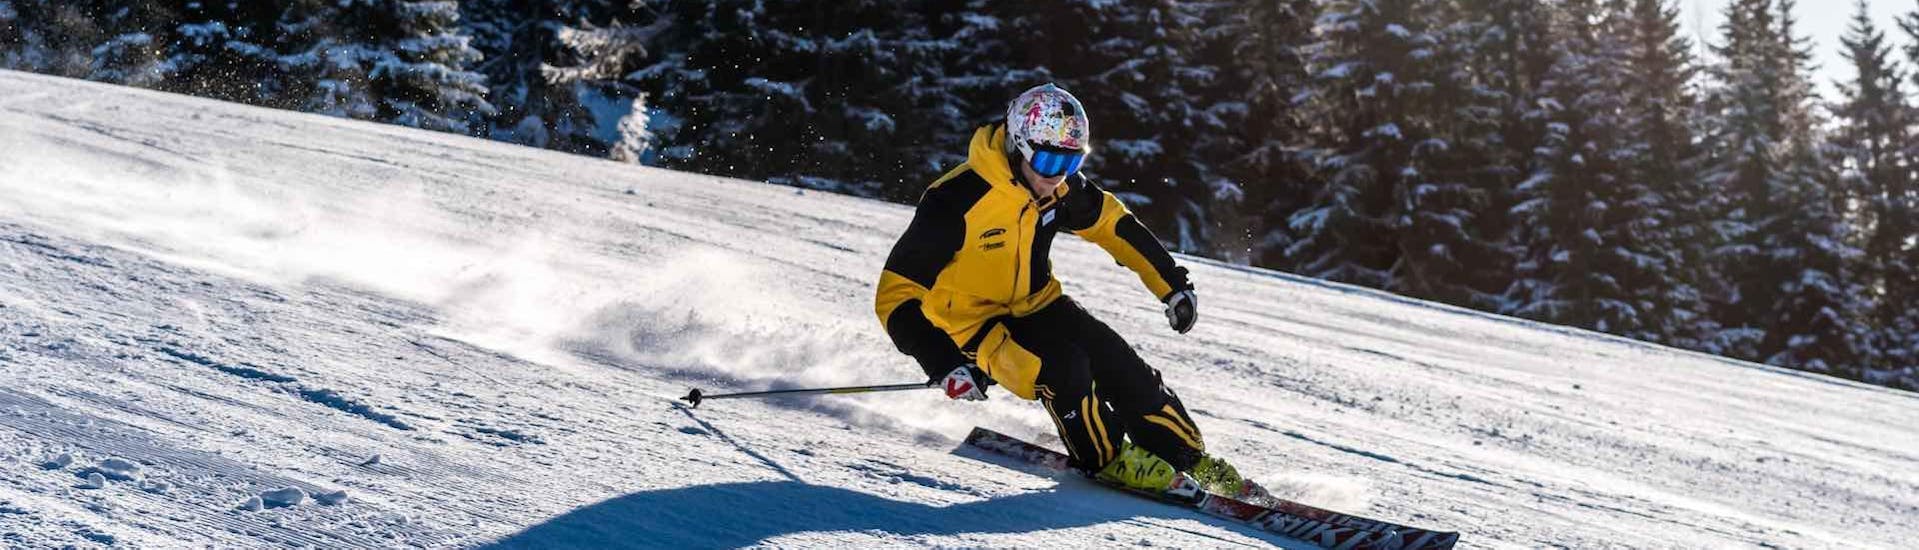 Private Ski Lessons for Adults of All Levels with Ski- &amp; Snowboard School Florian Kleinarl - Hero image